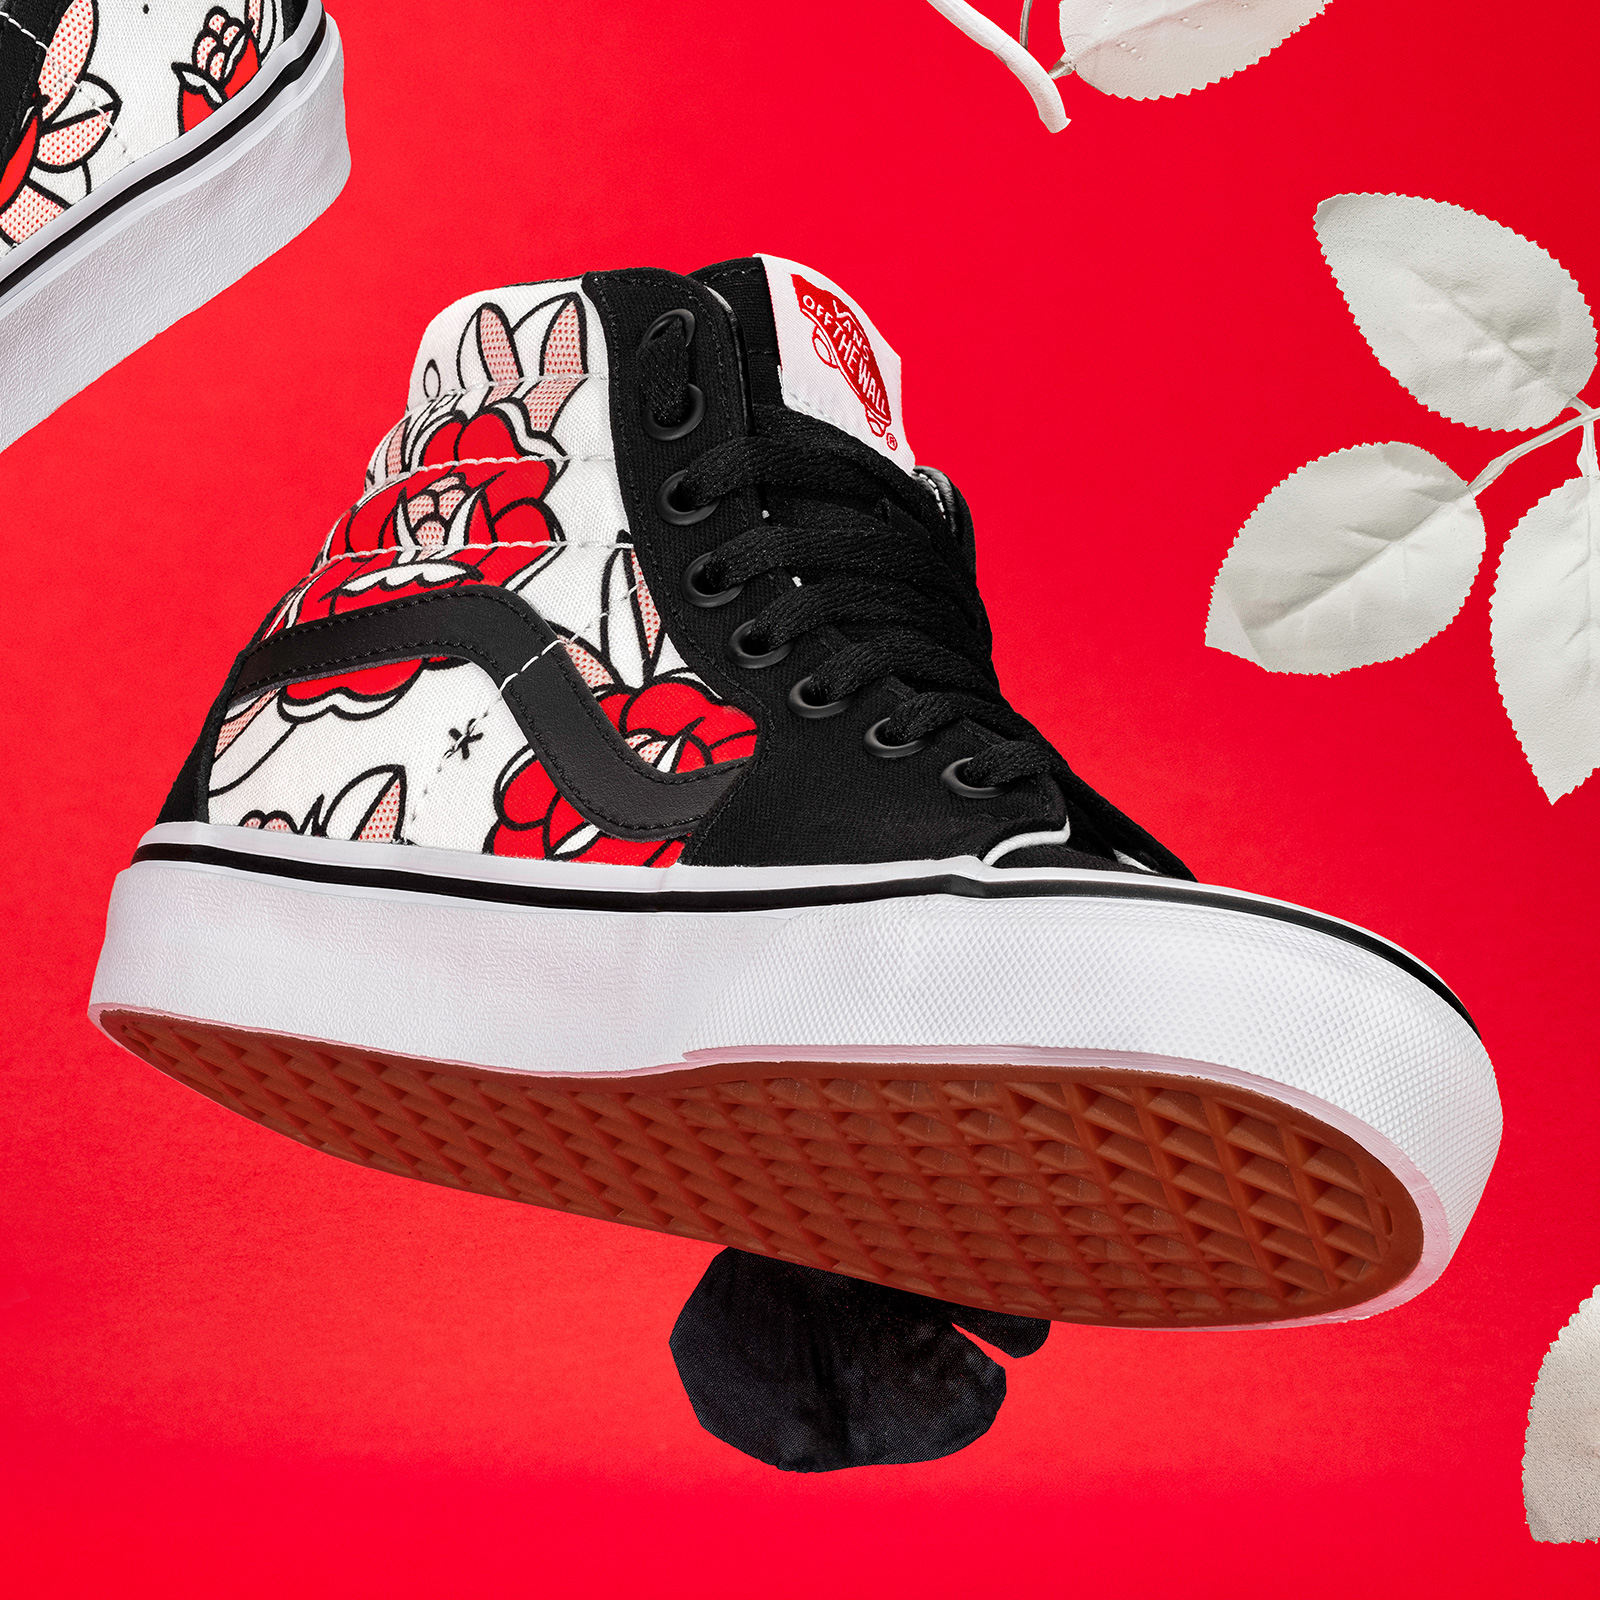 Detail of custom Vans shoe with black, red, and white rose pattern designed by Red Halftone